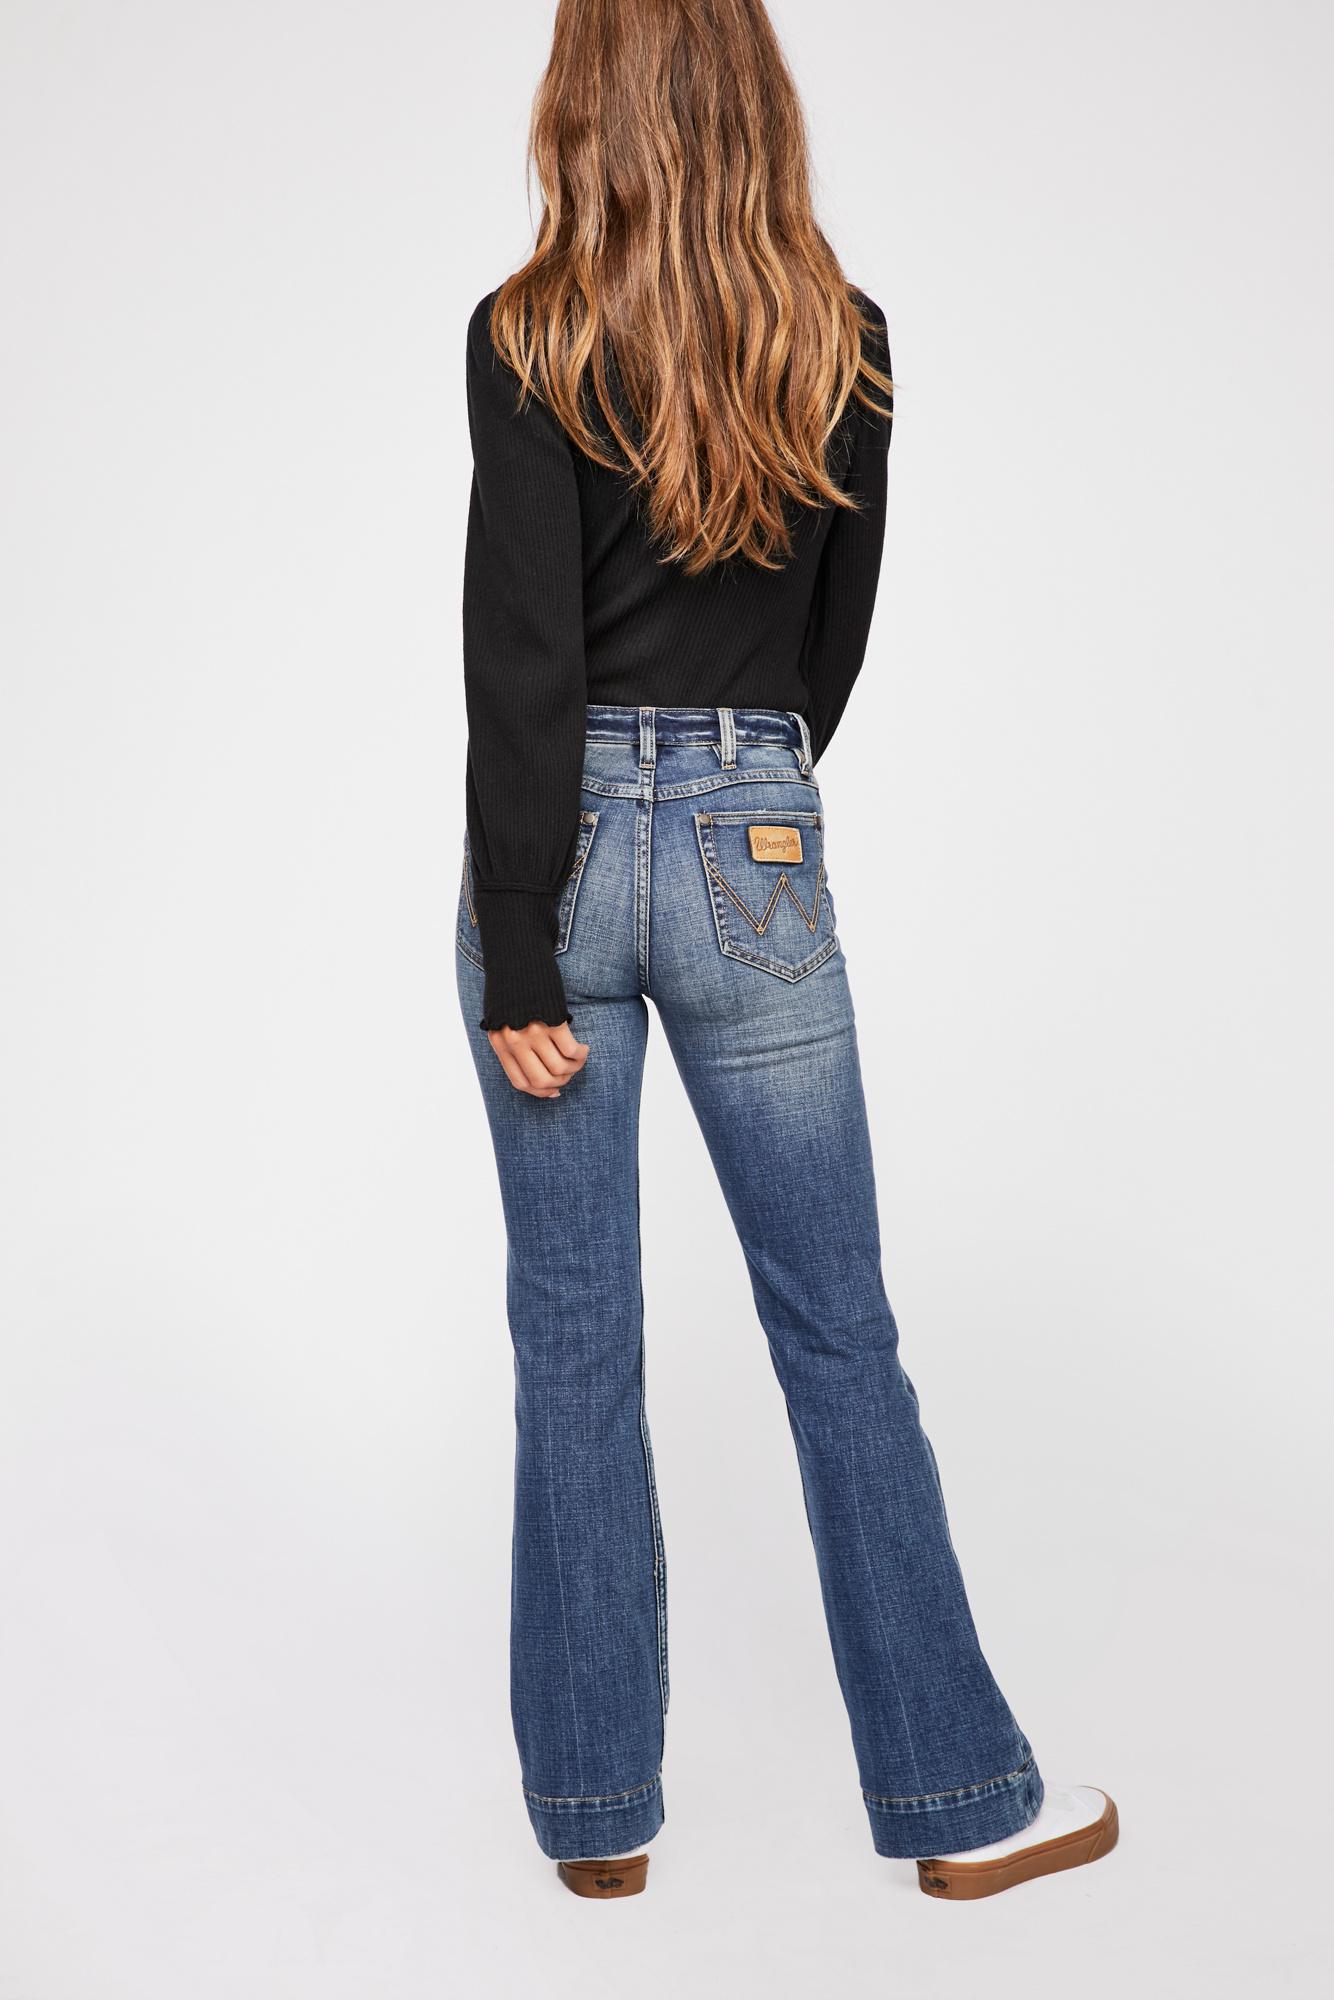 wrangler exaggerated bootcut jeans